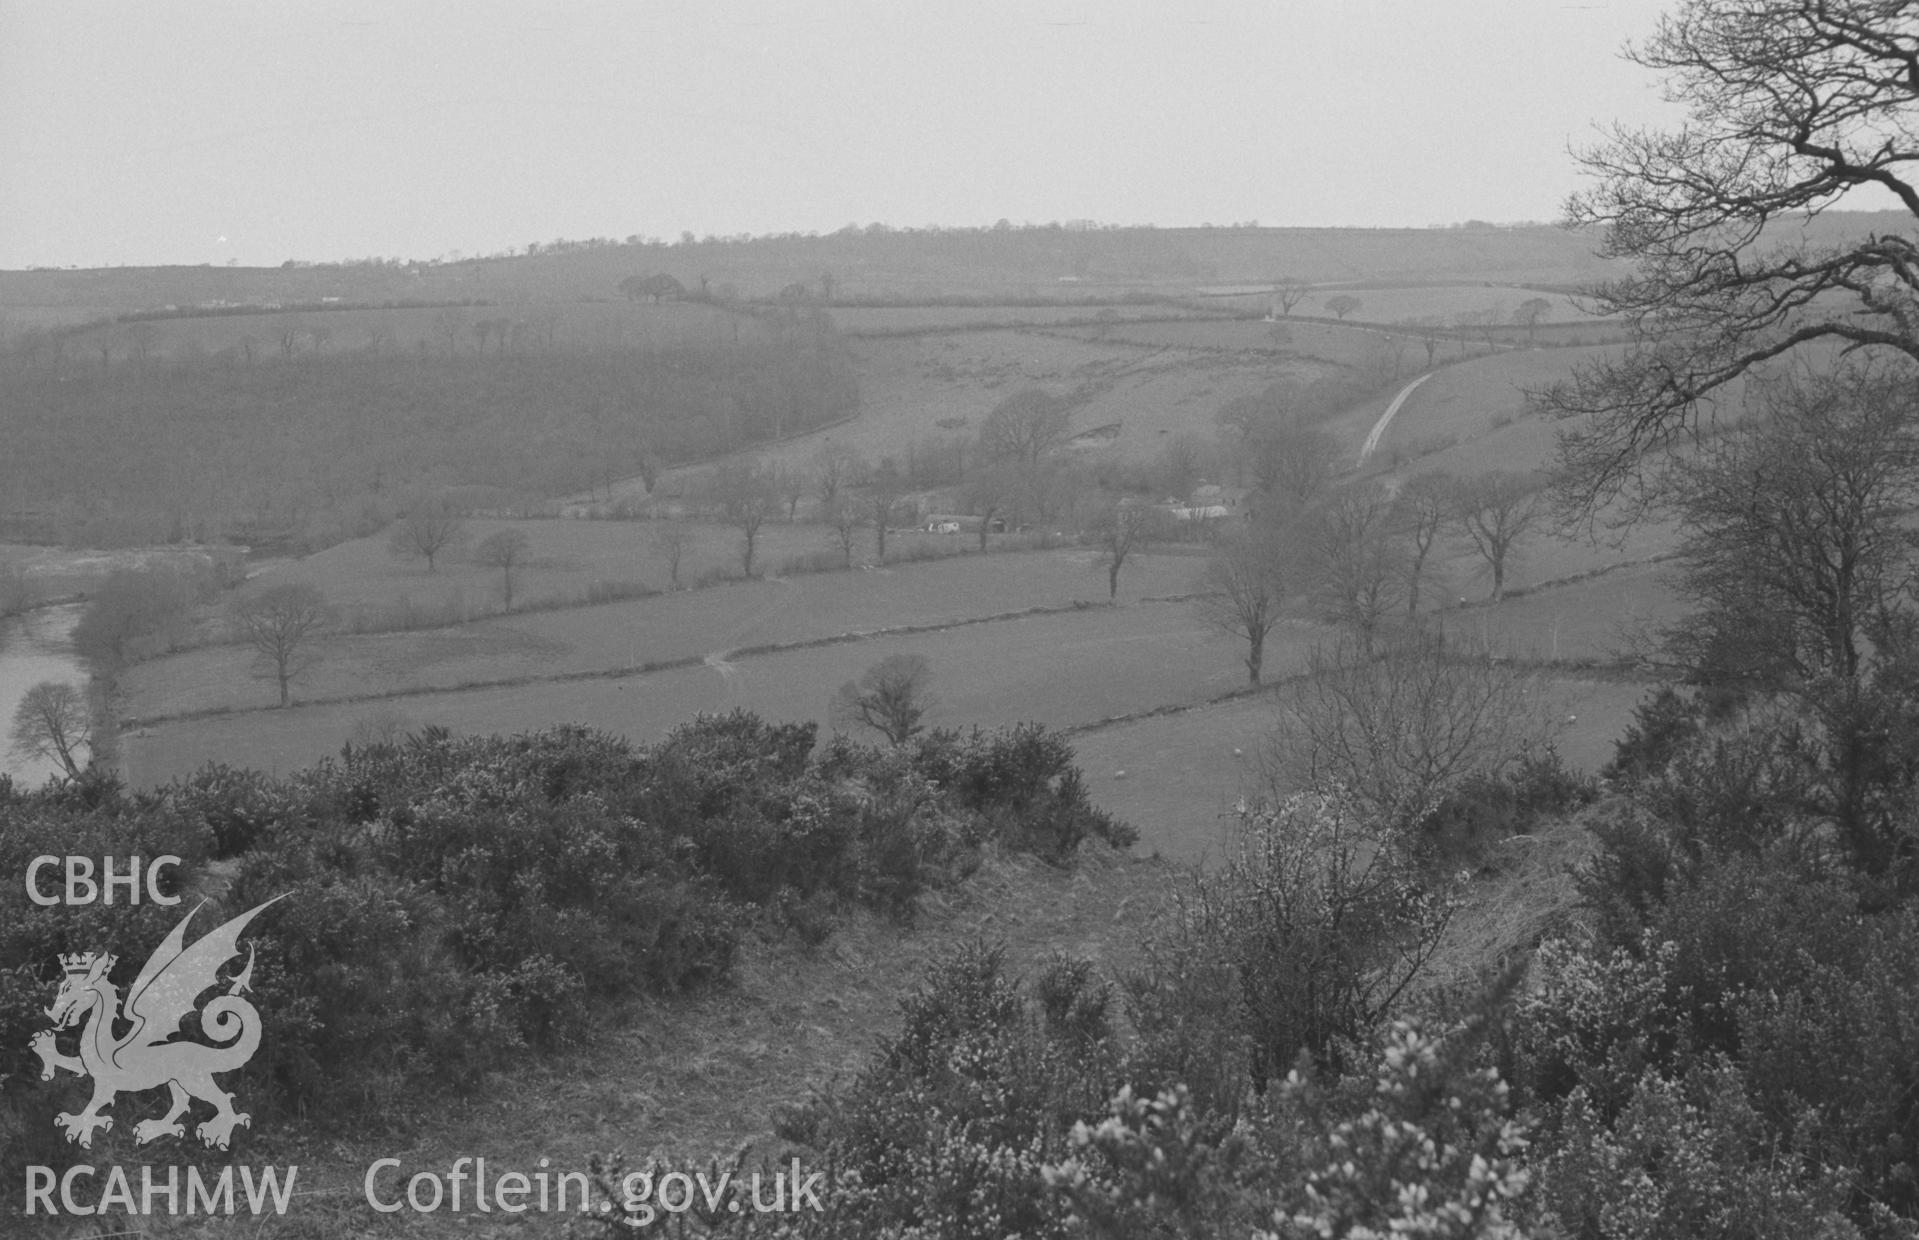 Digital copy of a black and white negative showing panoramic view looking north west over the 3-bank, 2-ditched Castell Pyr promontory fort earthworks. Glanrhydypysgod farm opposite. Photograph by Arthur O. Chater, April 1967. SN 470400. Photograph 3 of 4.